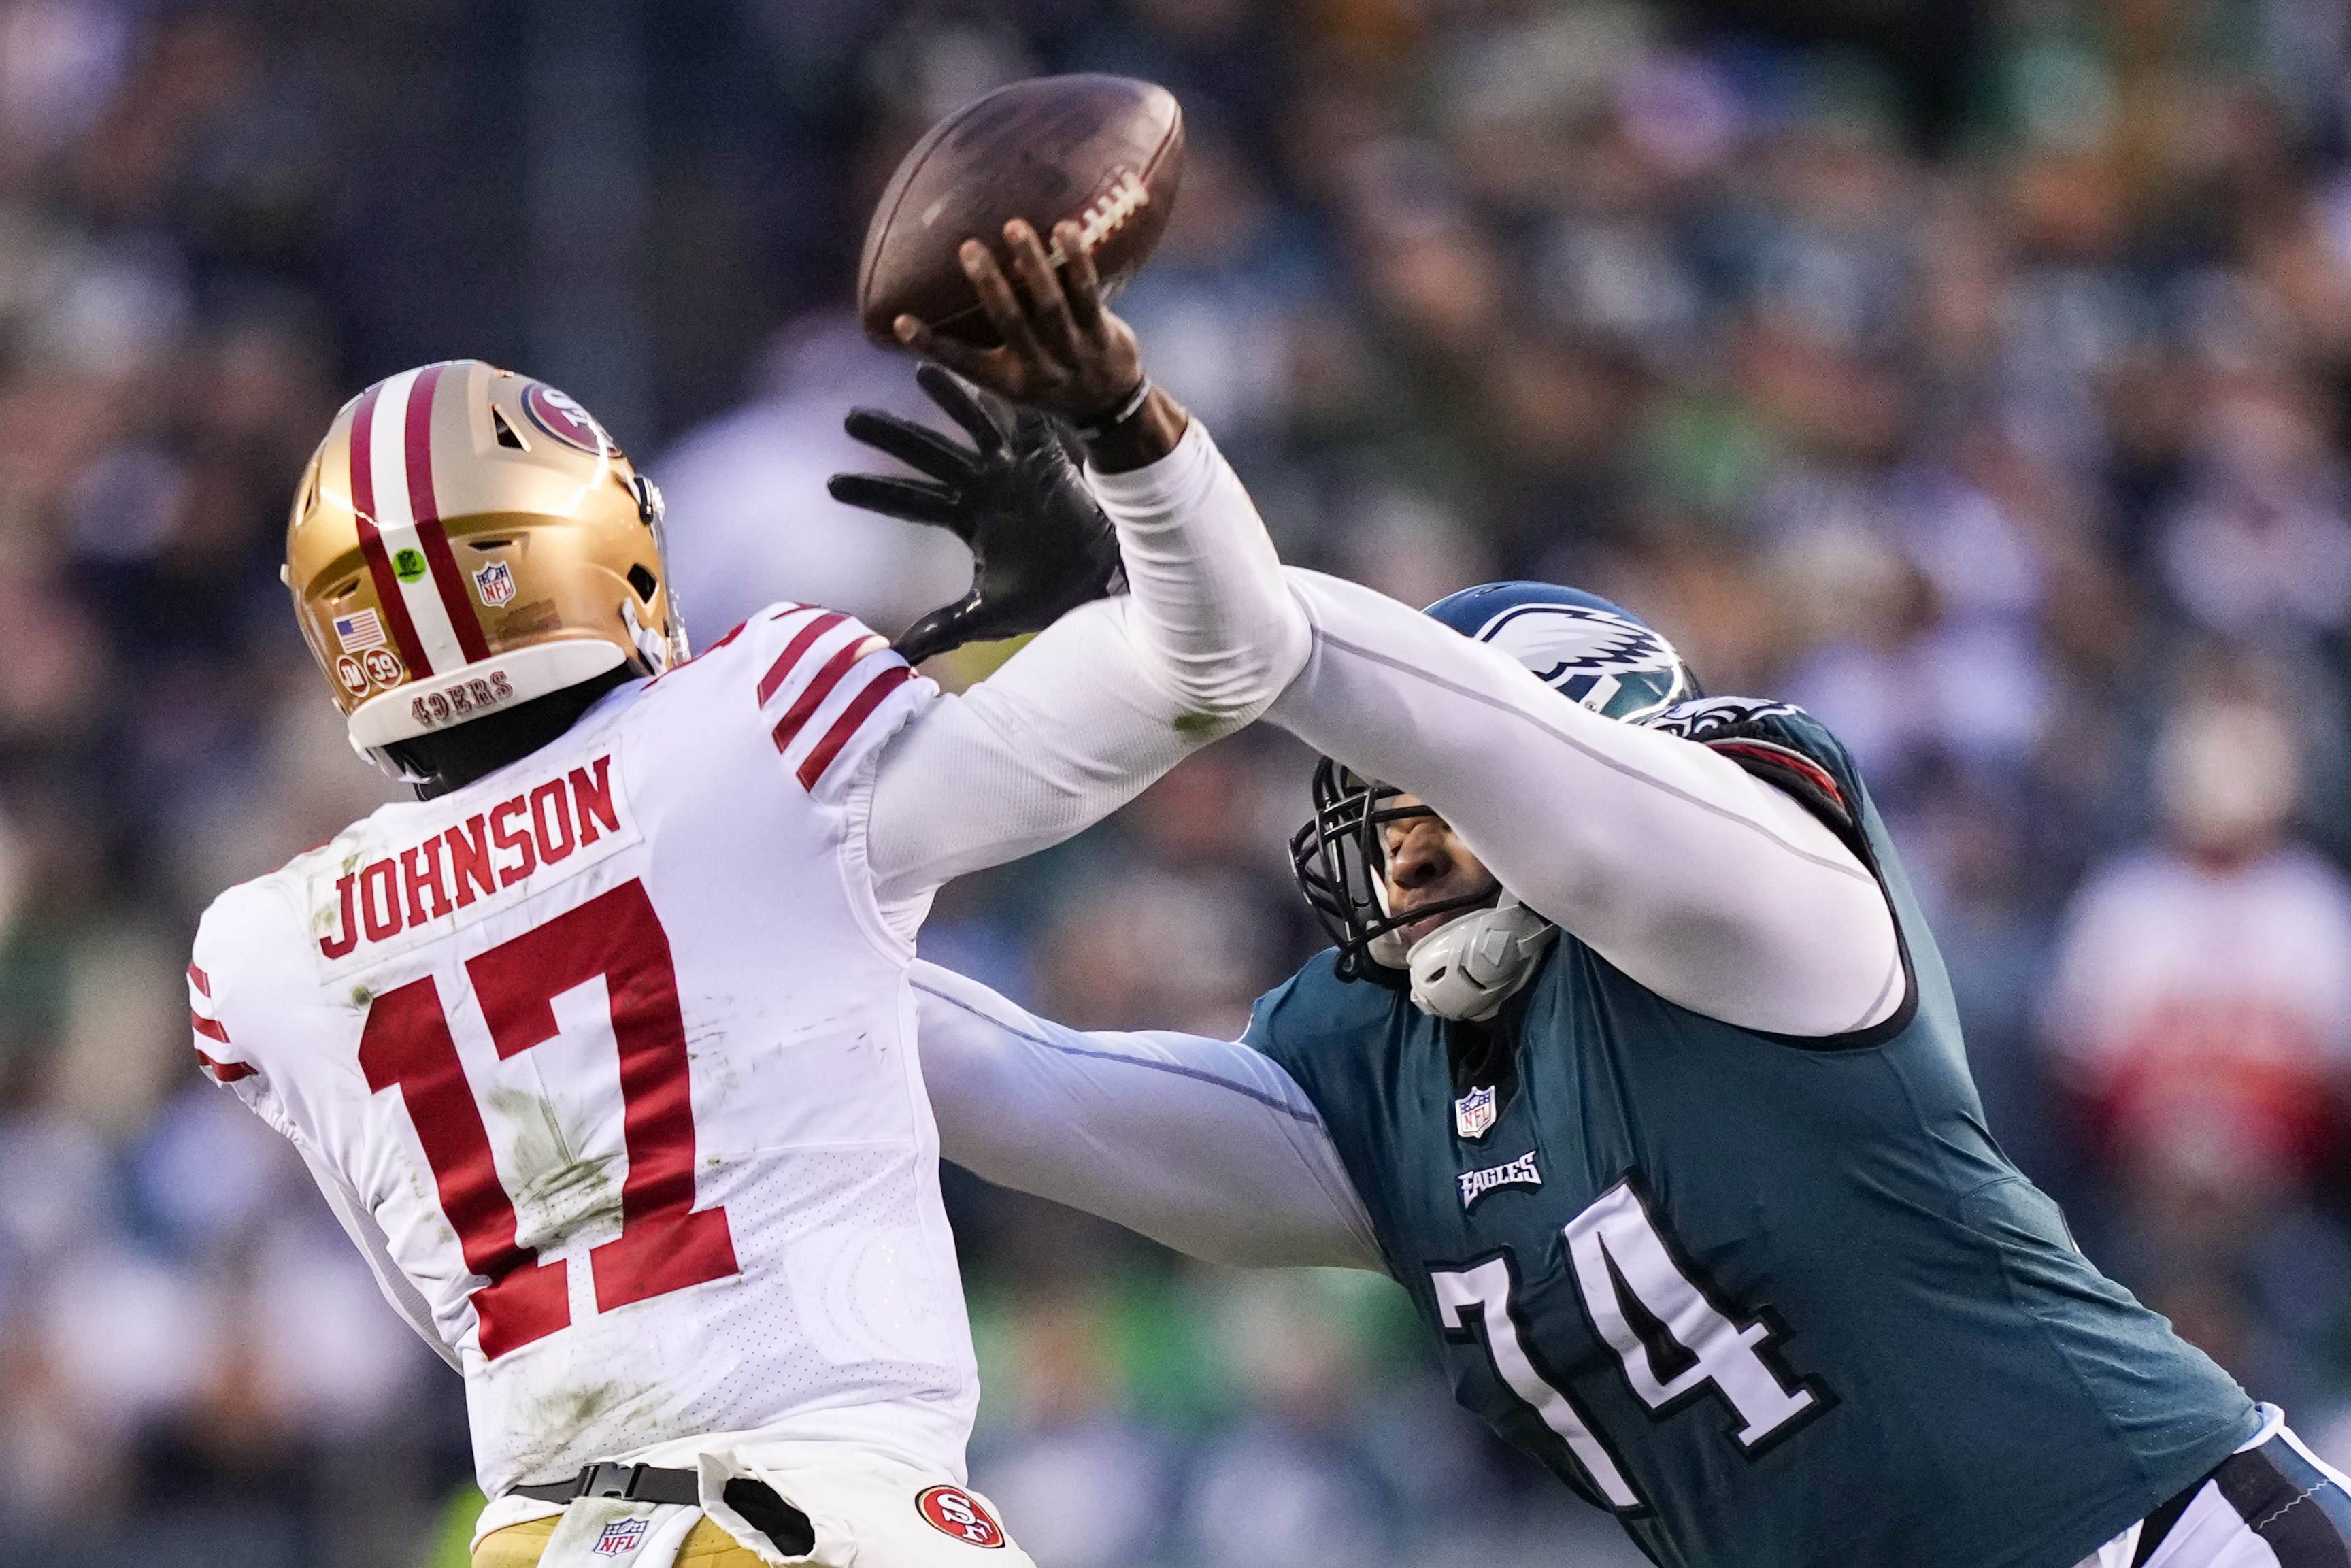 Your Guide to the Eagles-49ers NFC Championship Game